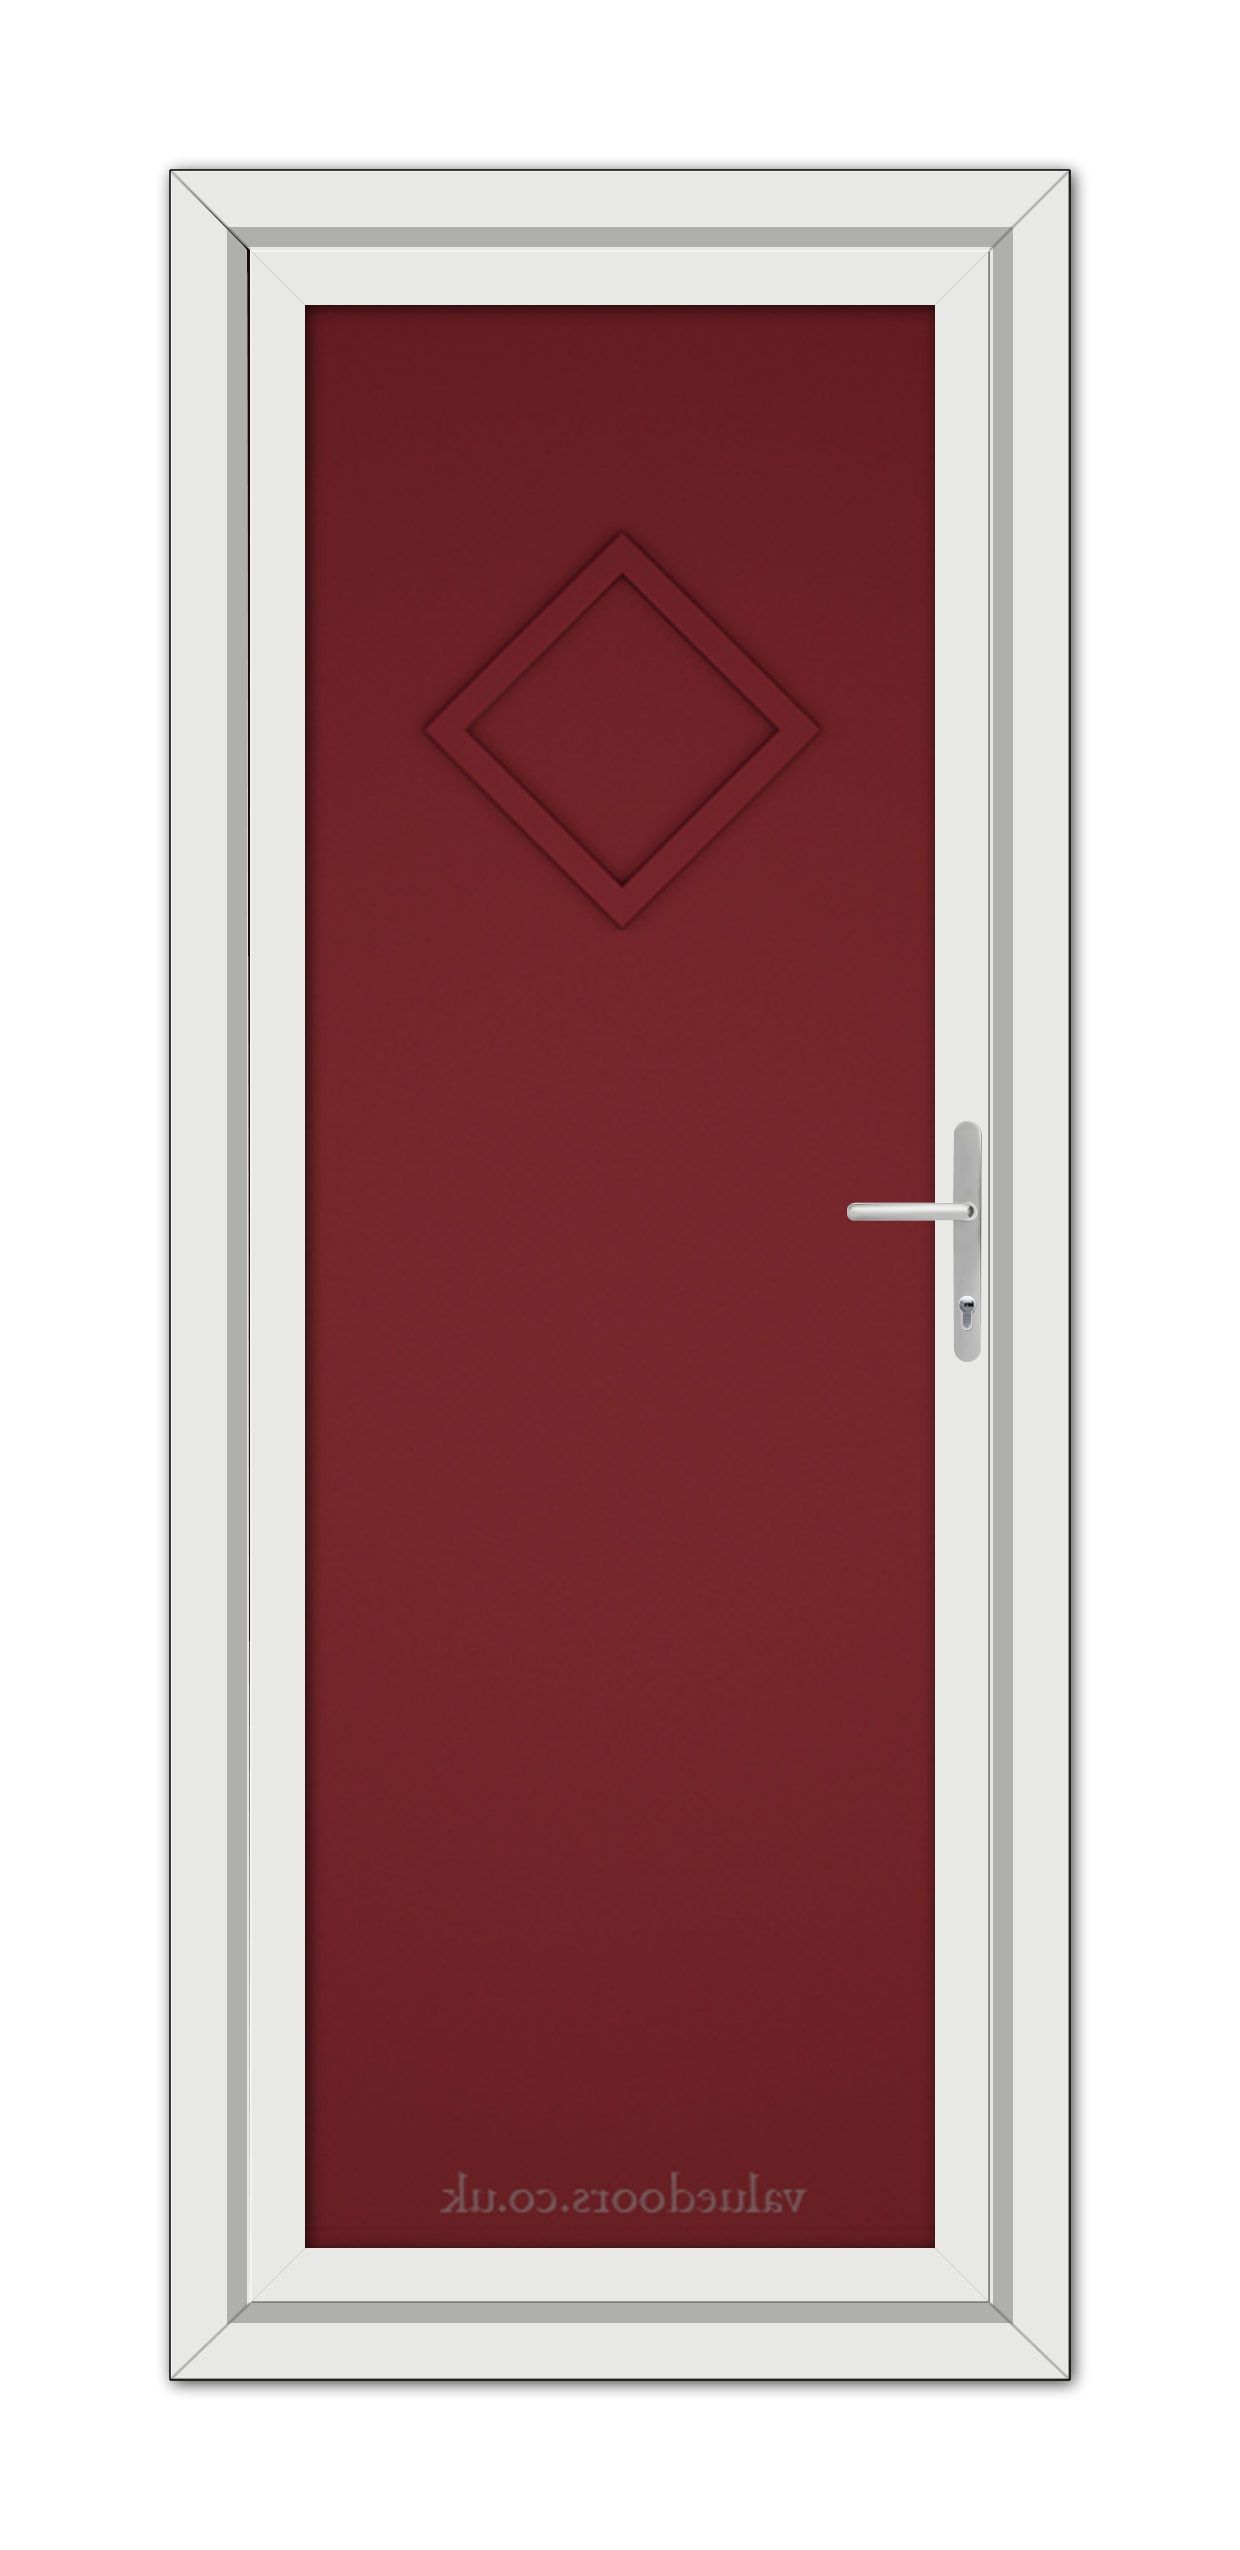 A vertical image of a closed Red Modern 5131 Solid uPVC Door with a diamond-shaped design in the center, framed in white with a silver handle on the right.